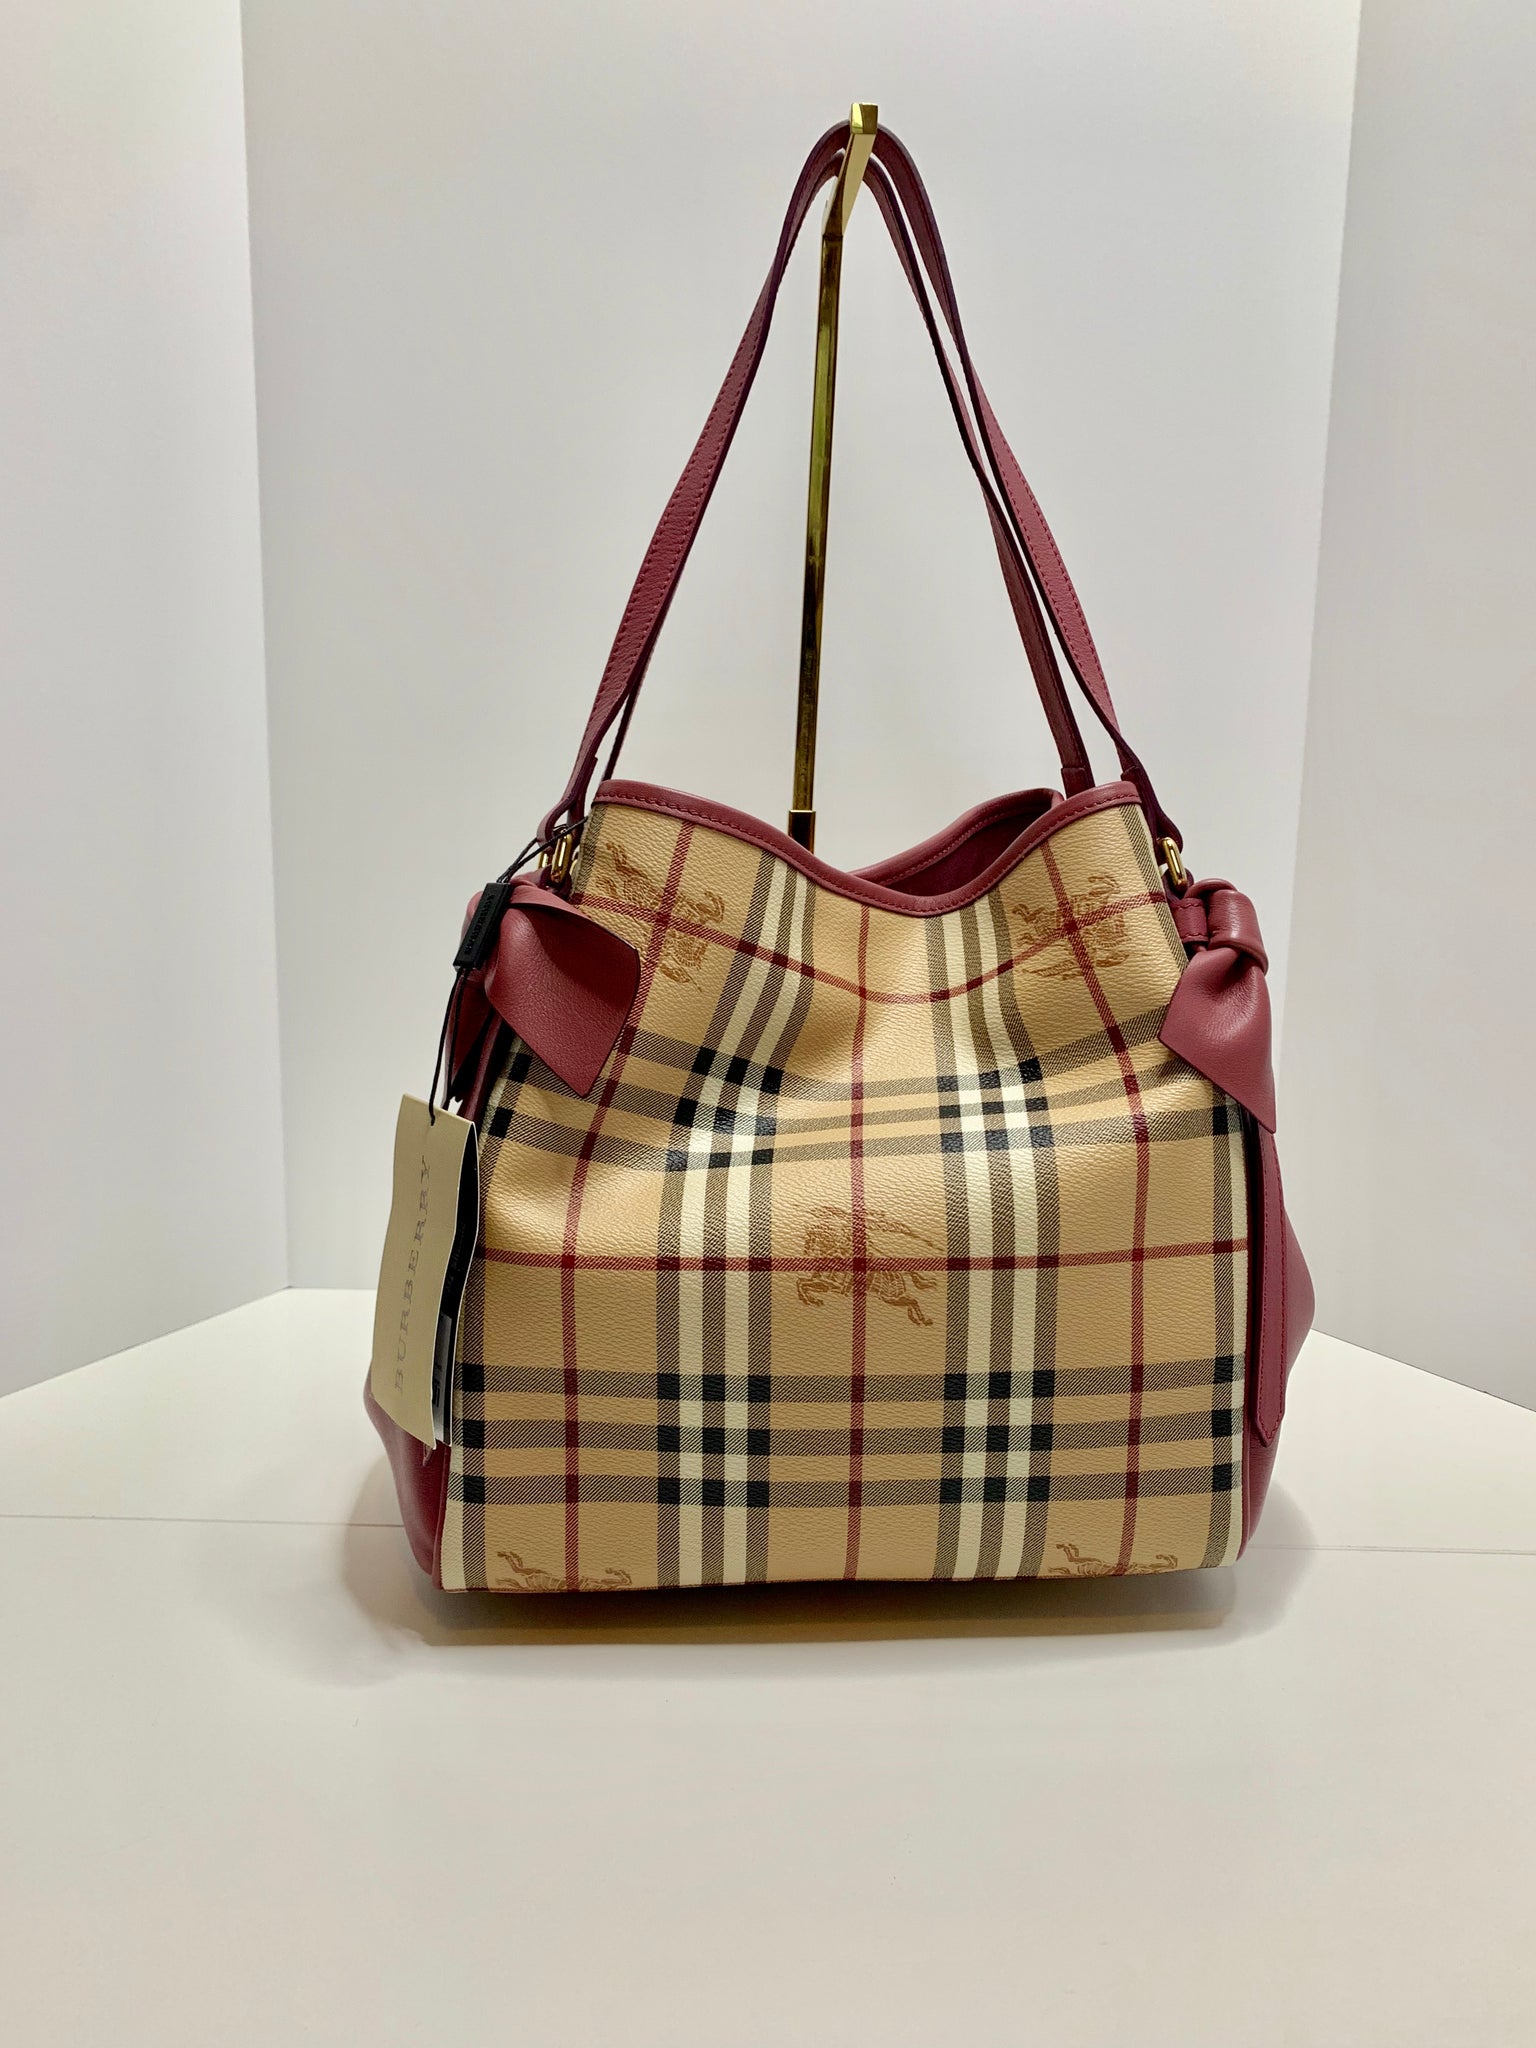 Burberry Brown/Smoke House Check Coated Canvas and Leather Small